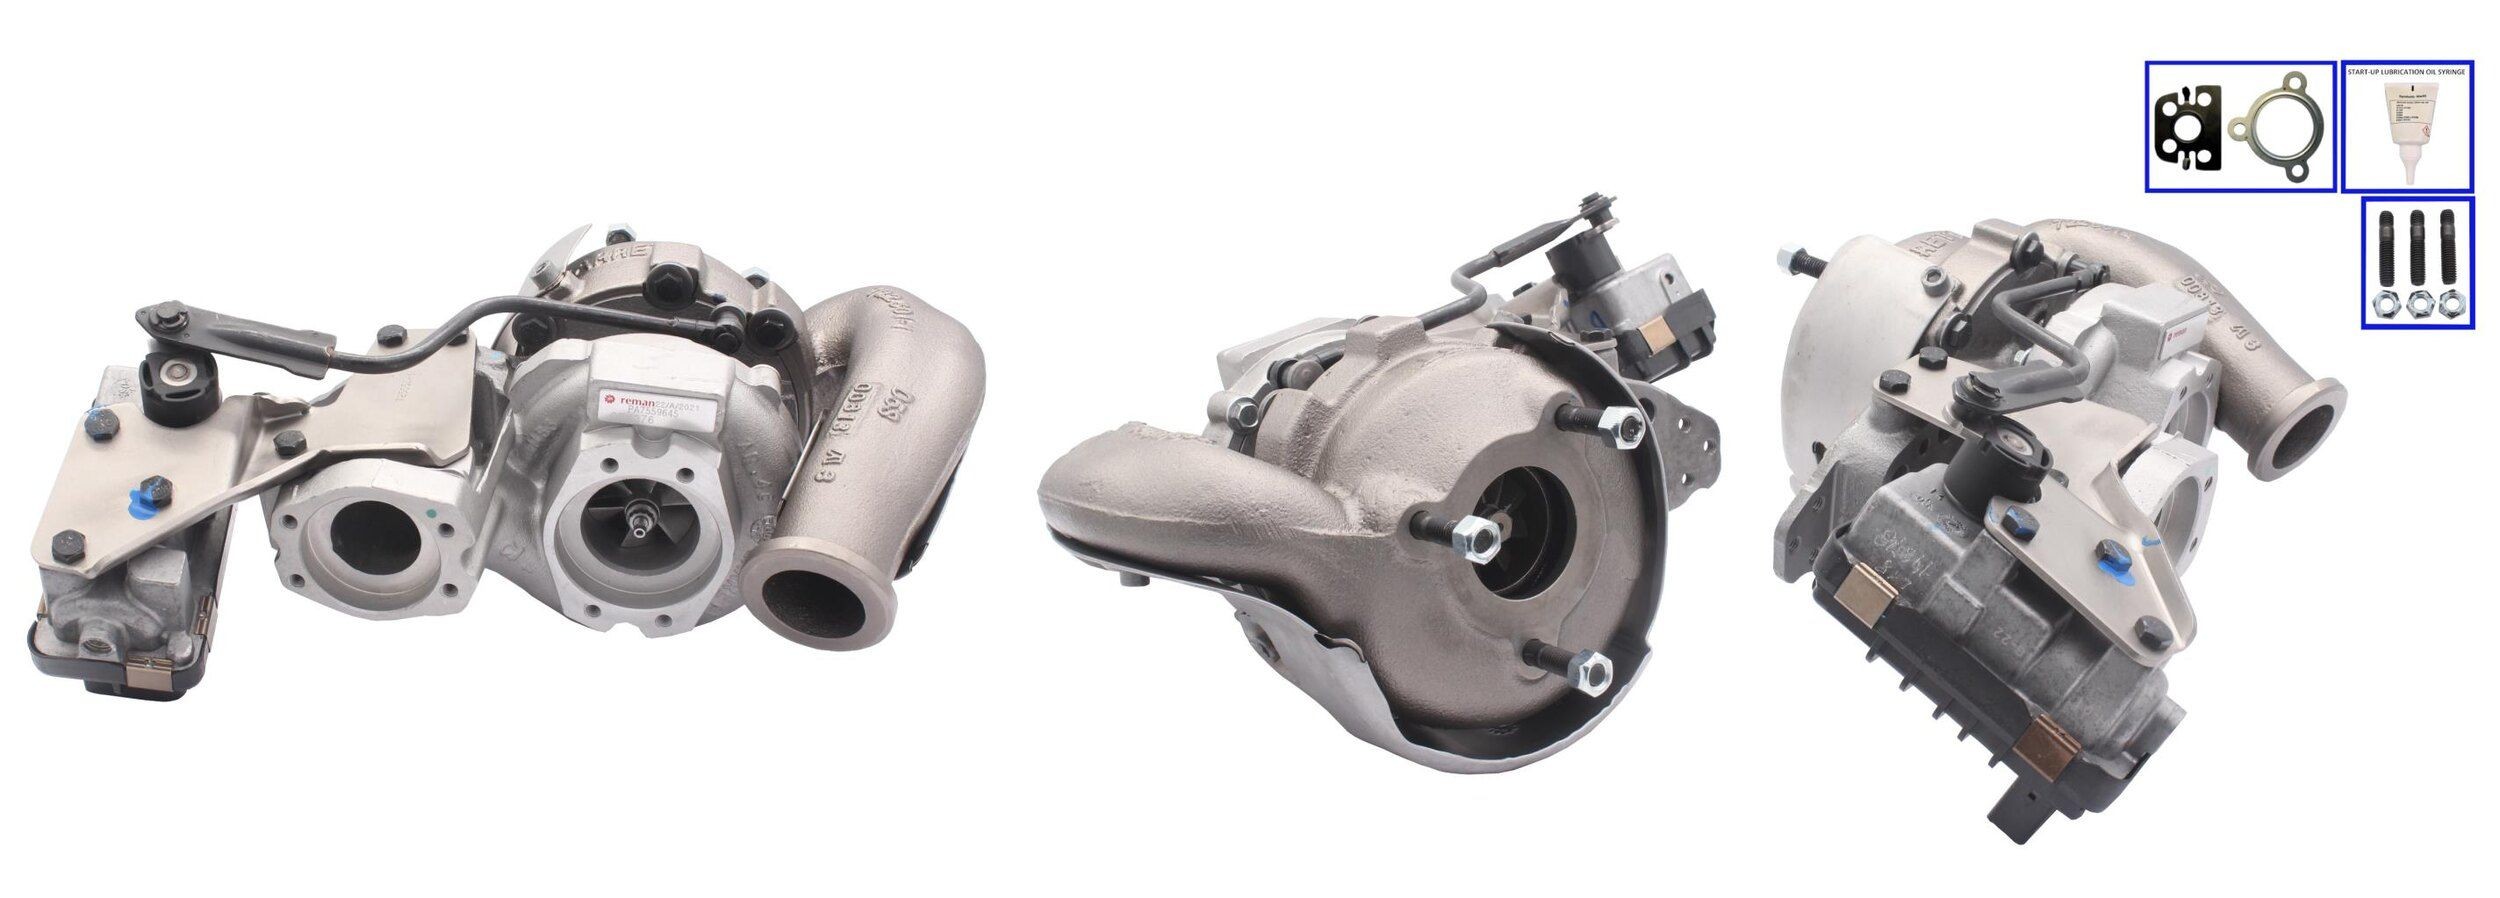 Original 91-1858 ELSTOCK Turbocharger experience and price